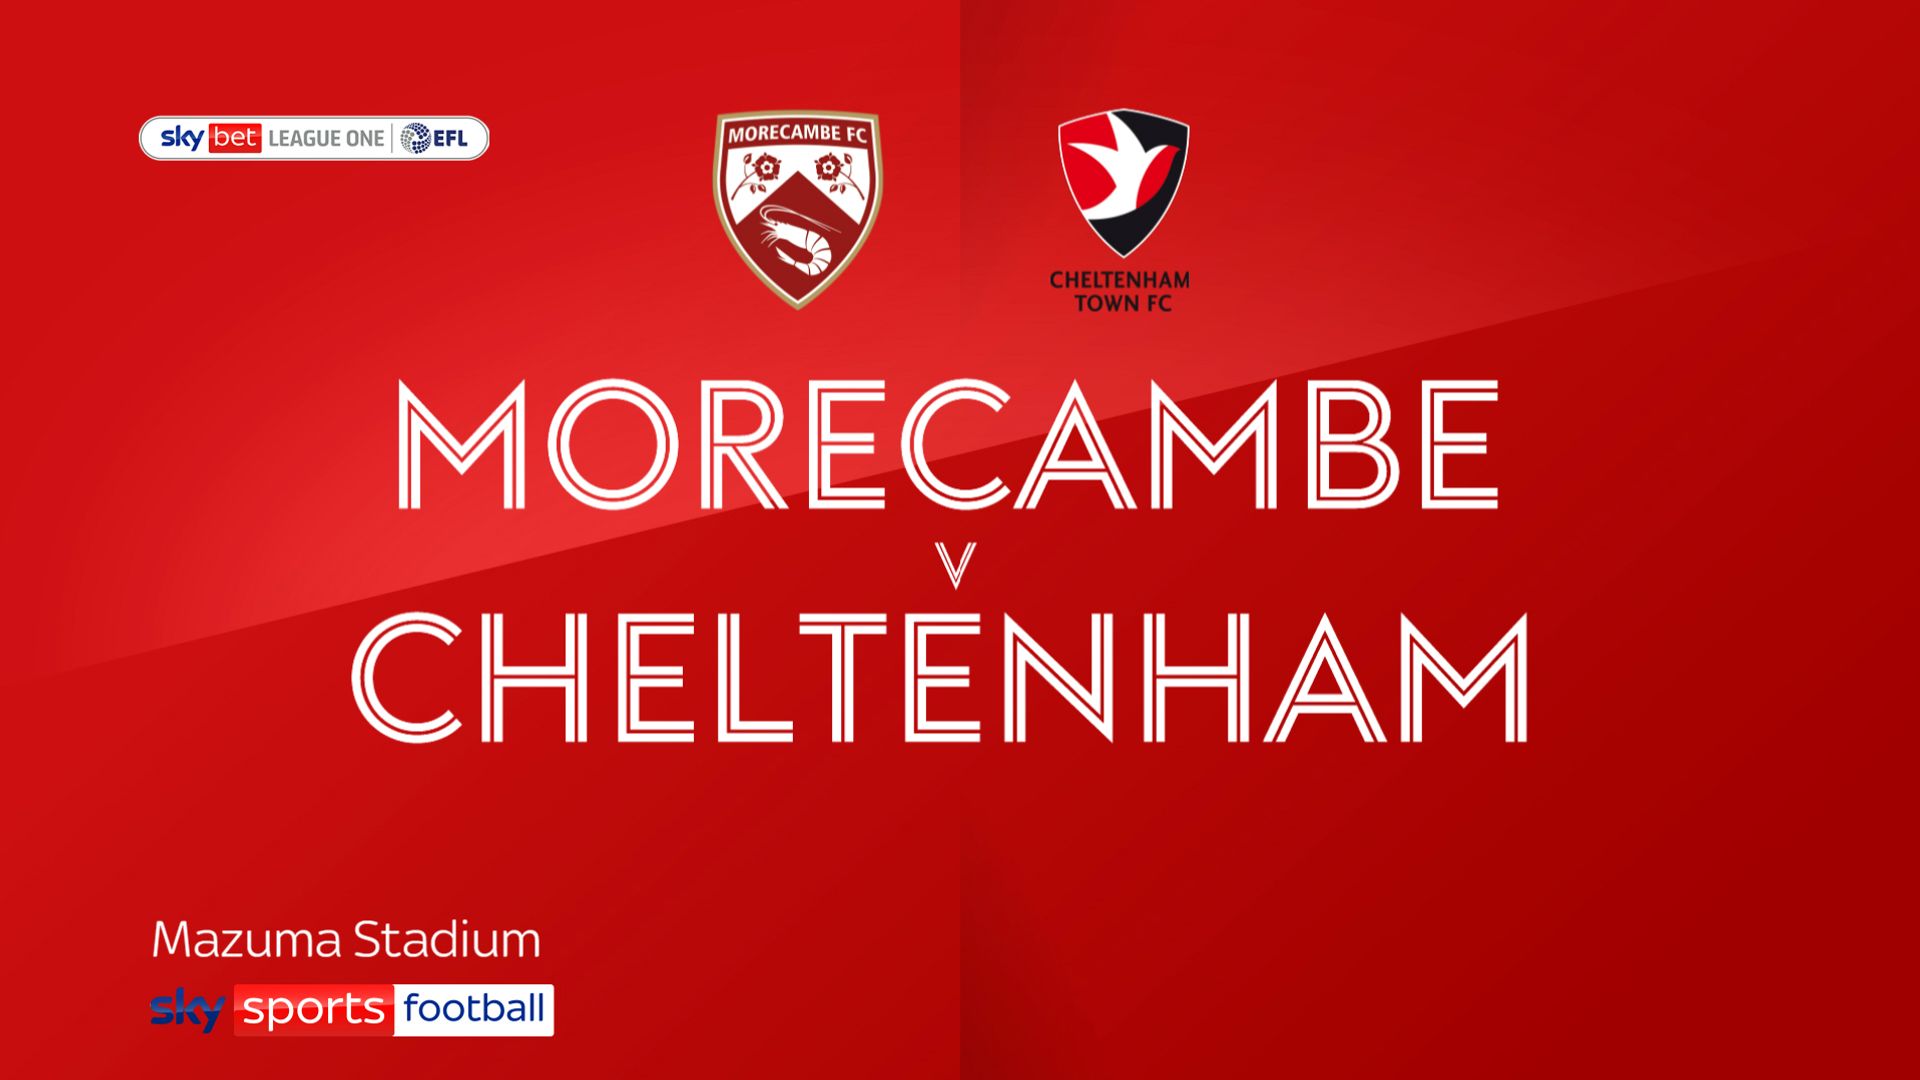 Morecambe 2-1 Cheltenham: Shrimps win to move out of drop zone